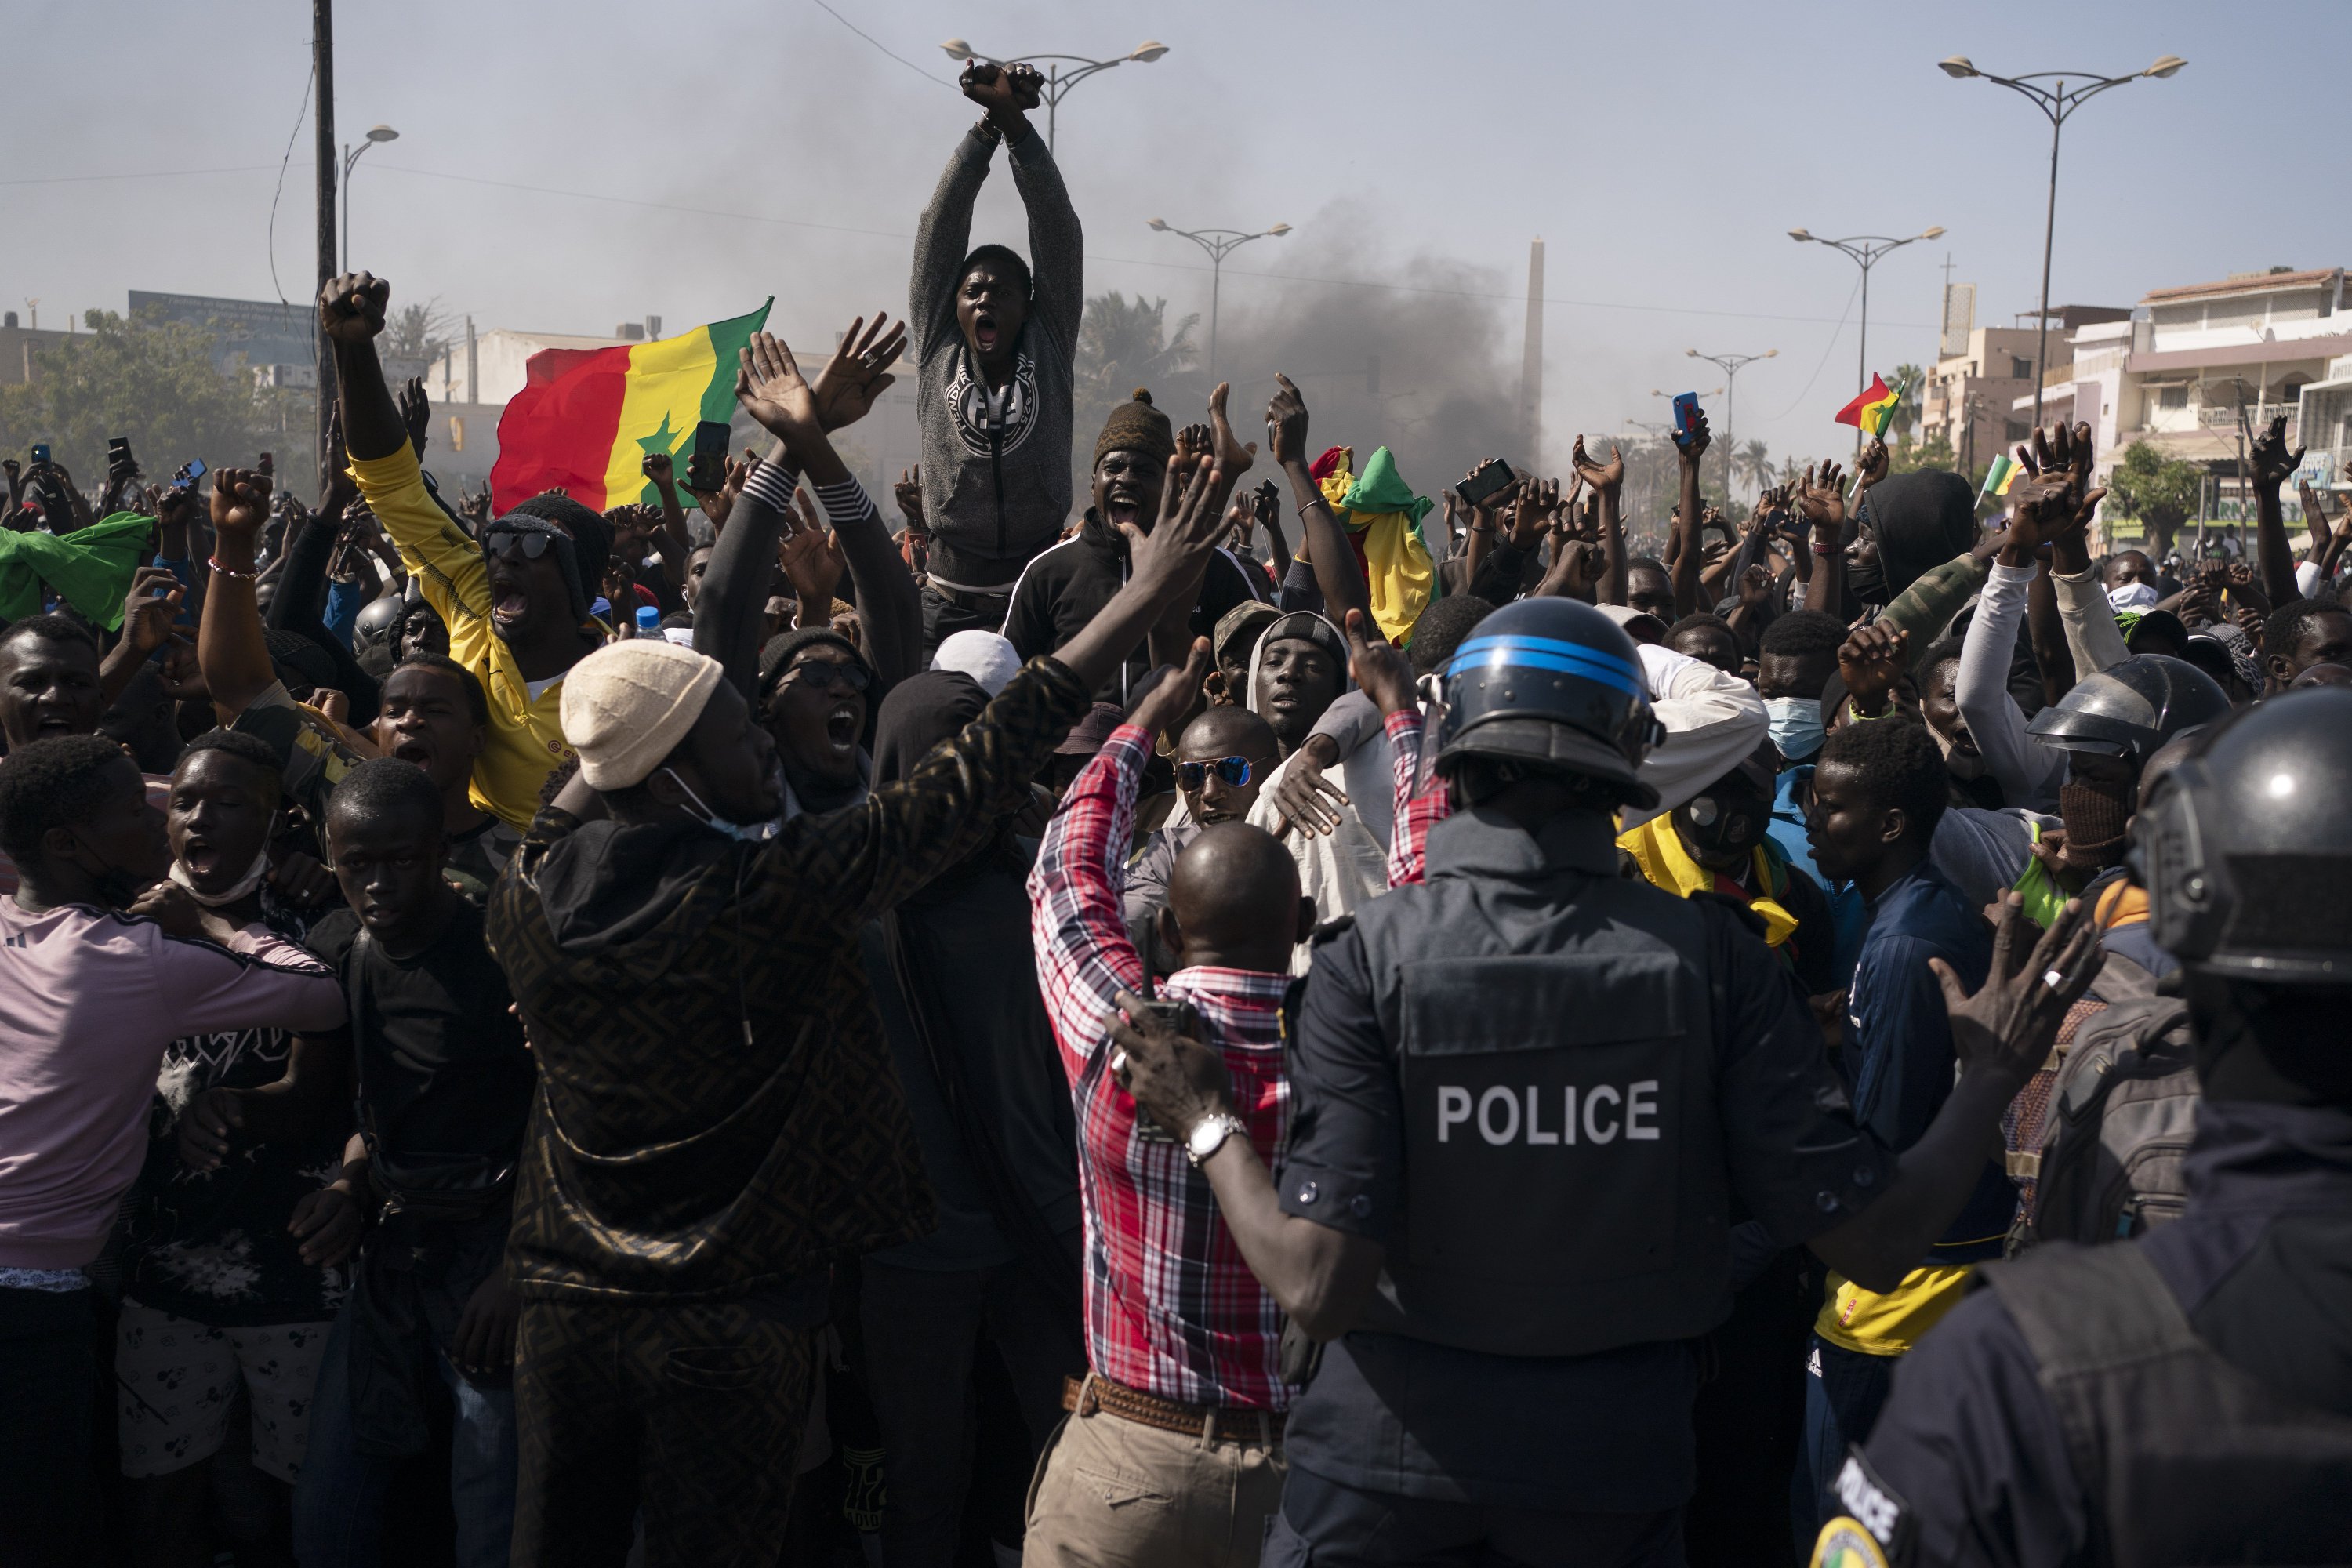 Senegalese opposition leader released as clashes erupt